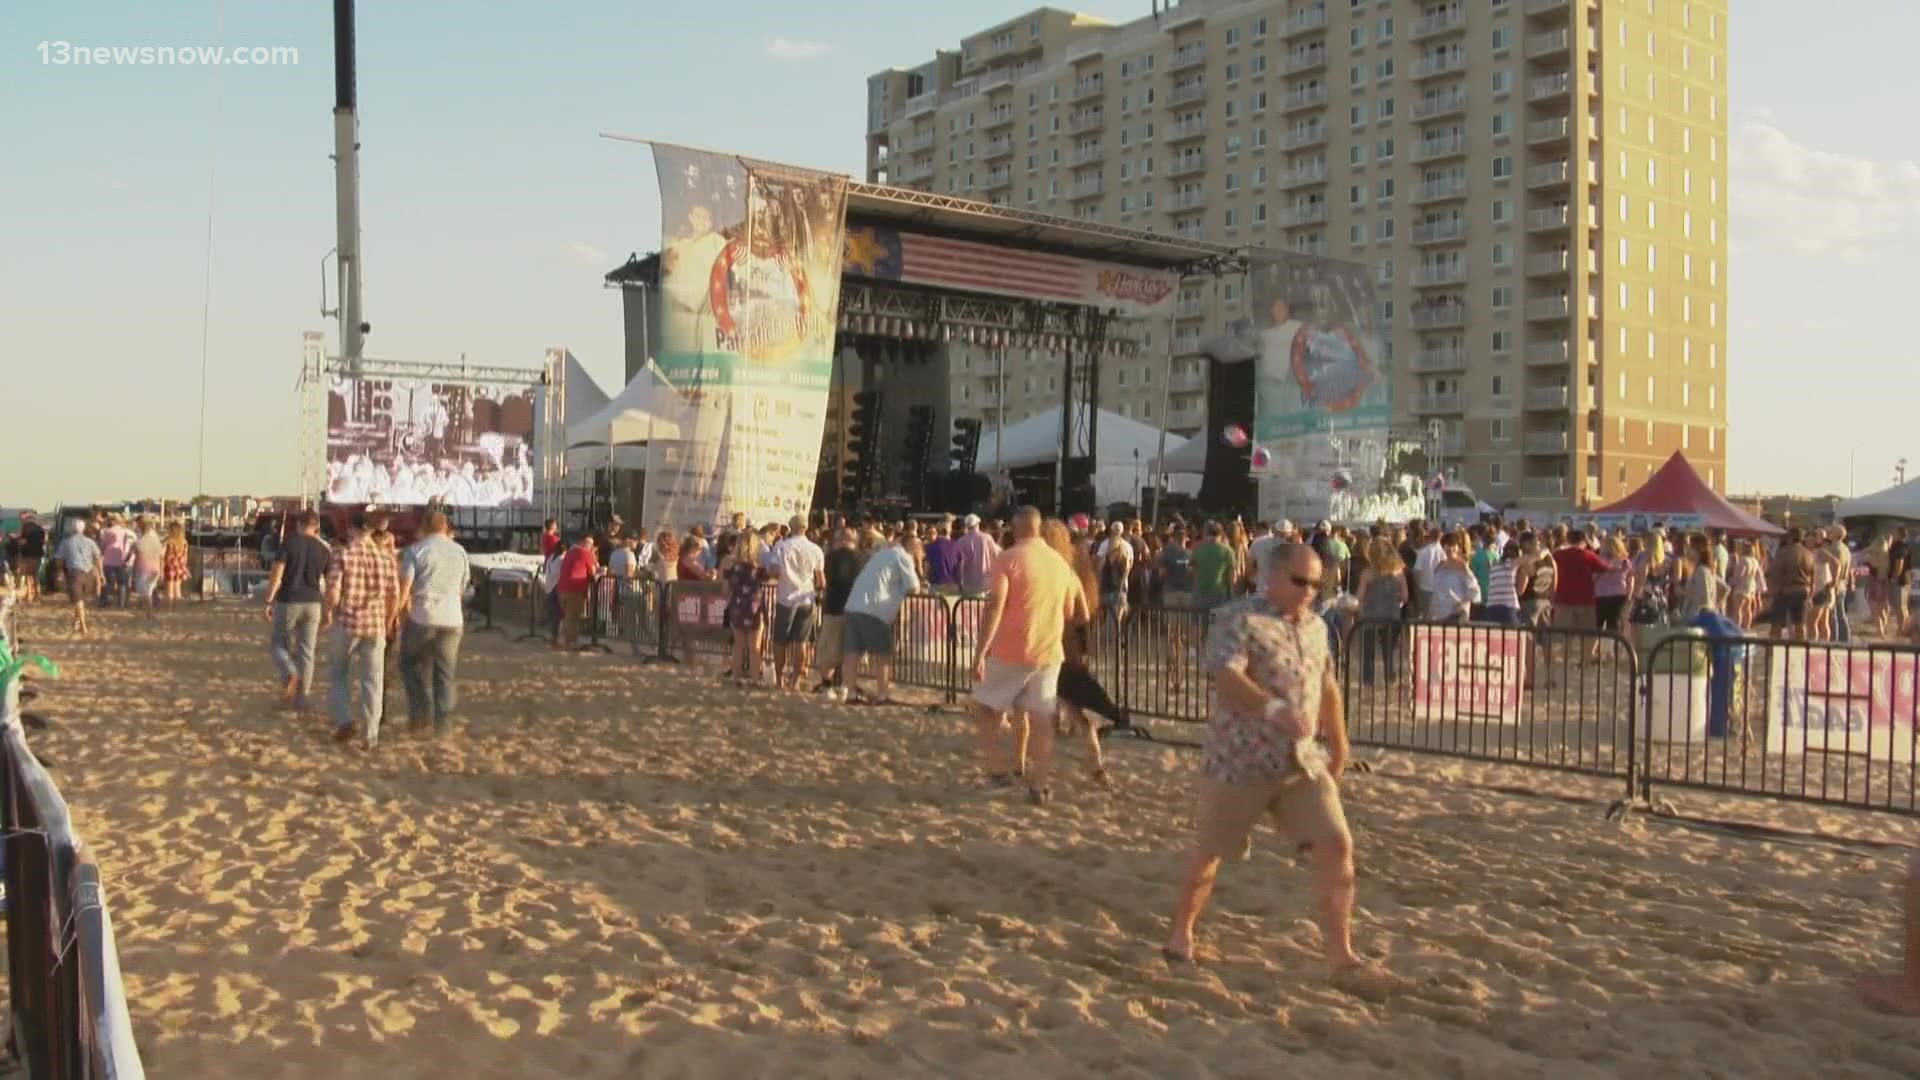 Patriotic Festival will come alive in Downtown Norfolk during Memorial Day Weekend 2022. Organizers say they'll have concerts at the Scope Arena and Town Point Park.